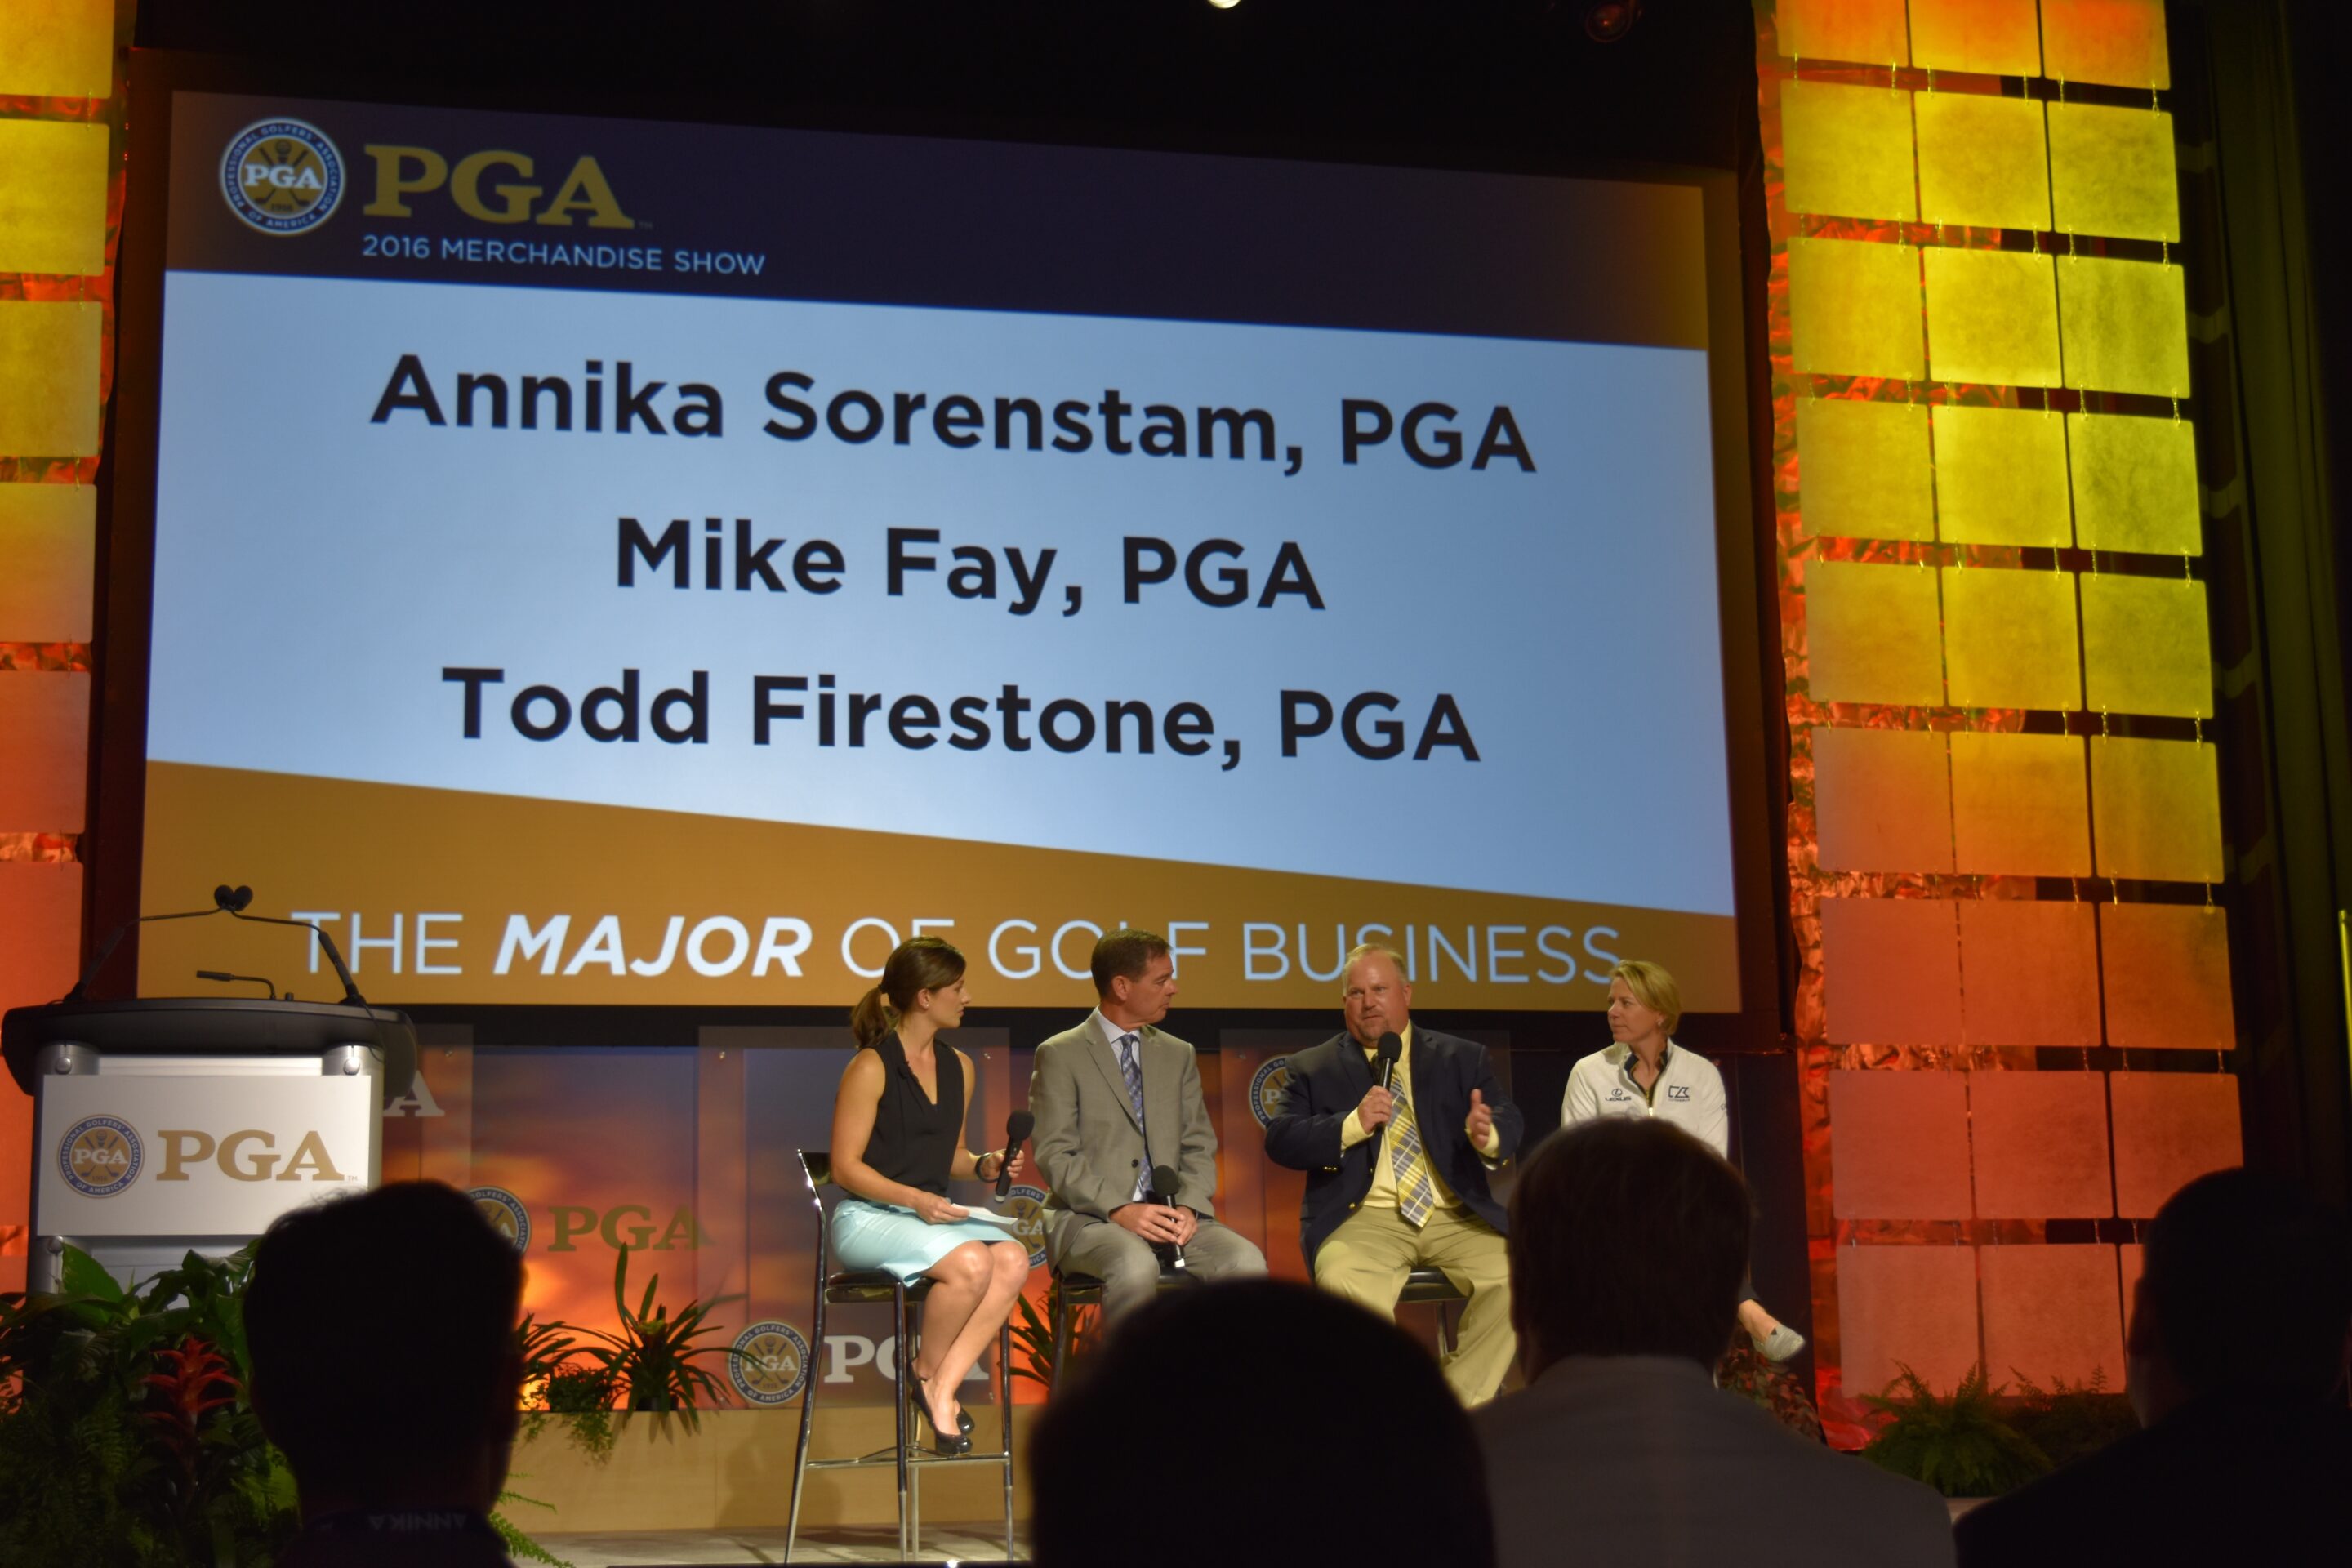 Mike Fay Guest Speaker At The 2016 PGA Merchandise Show